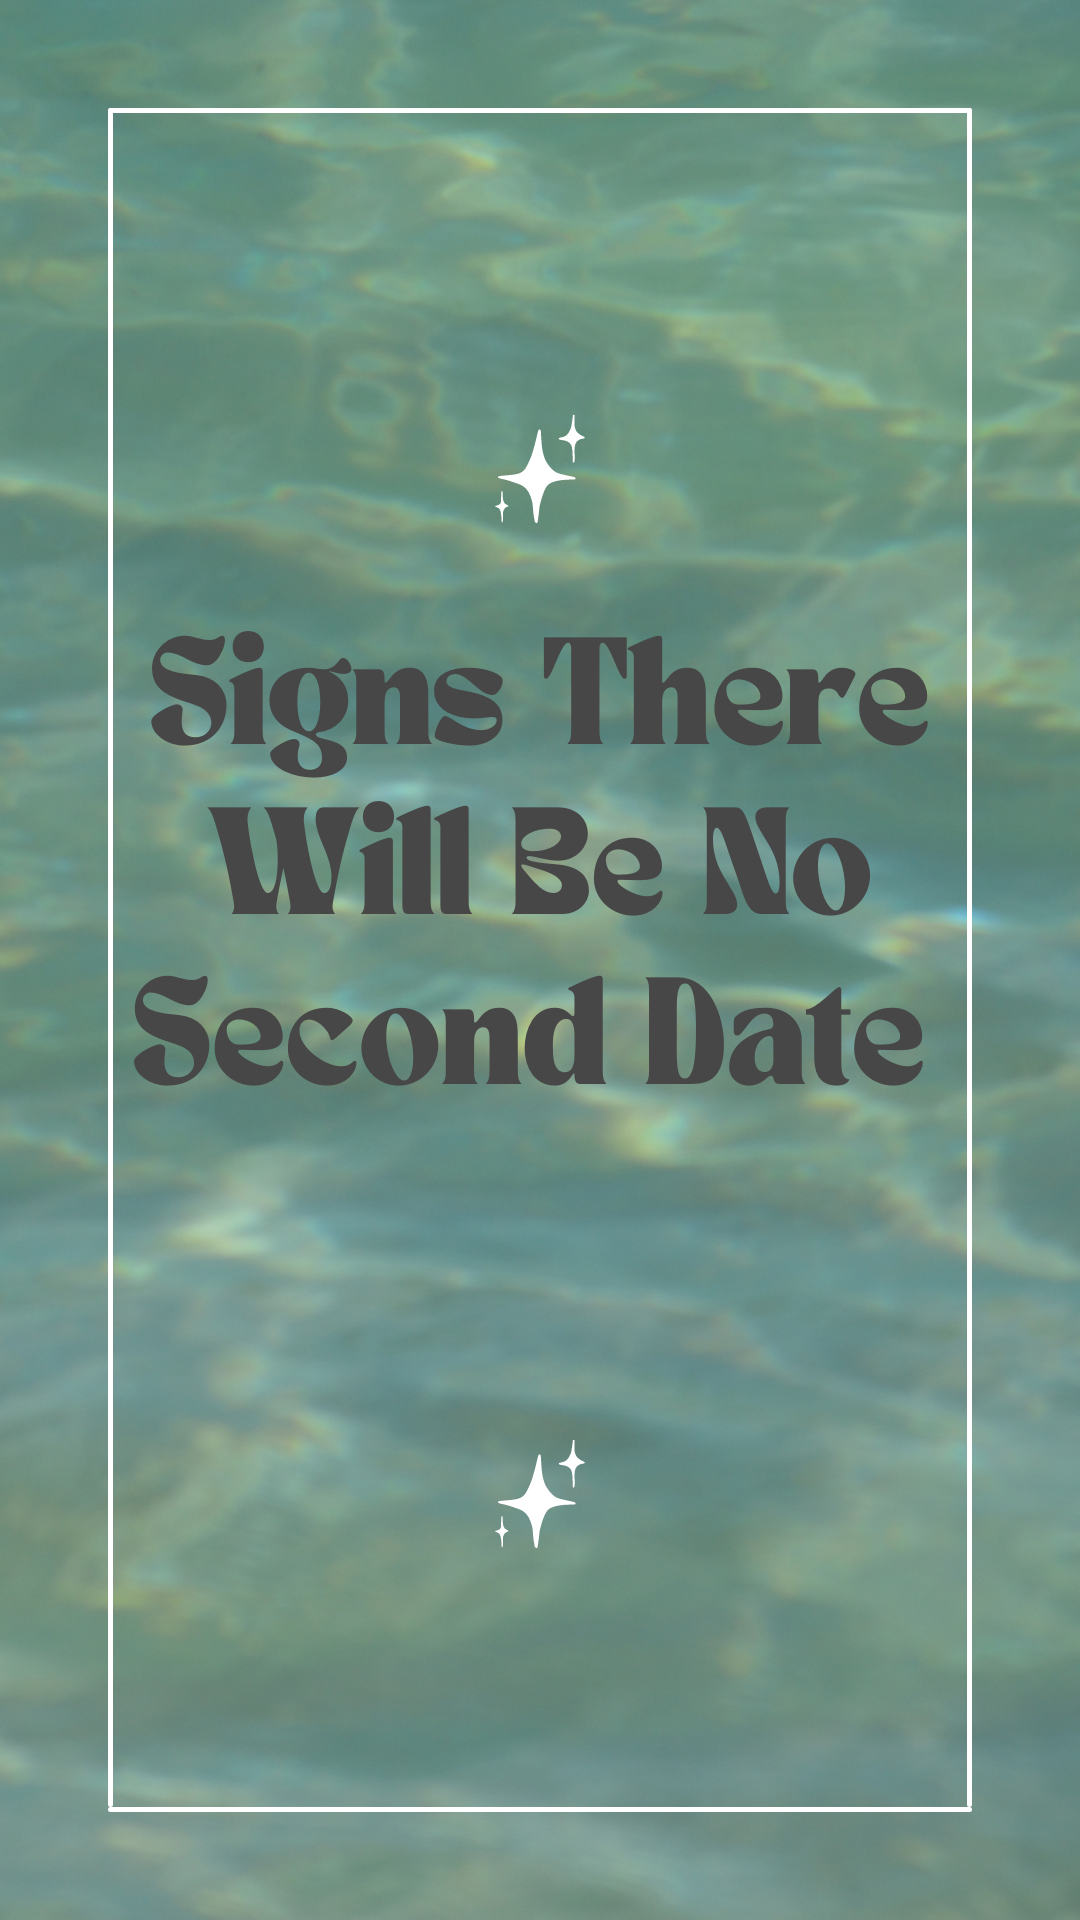 Signs there will be no second date